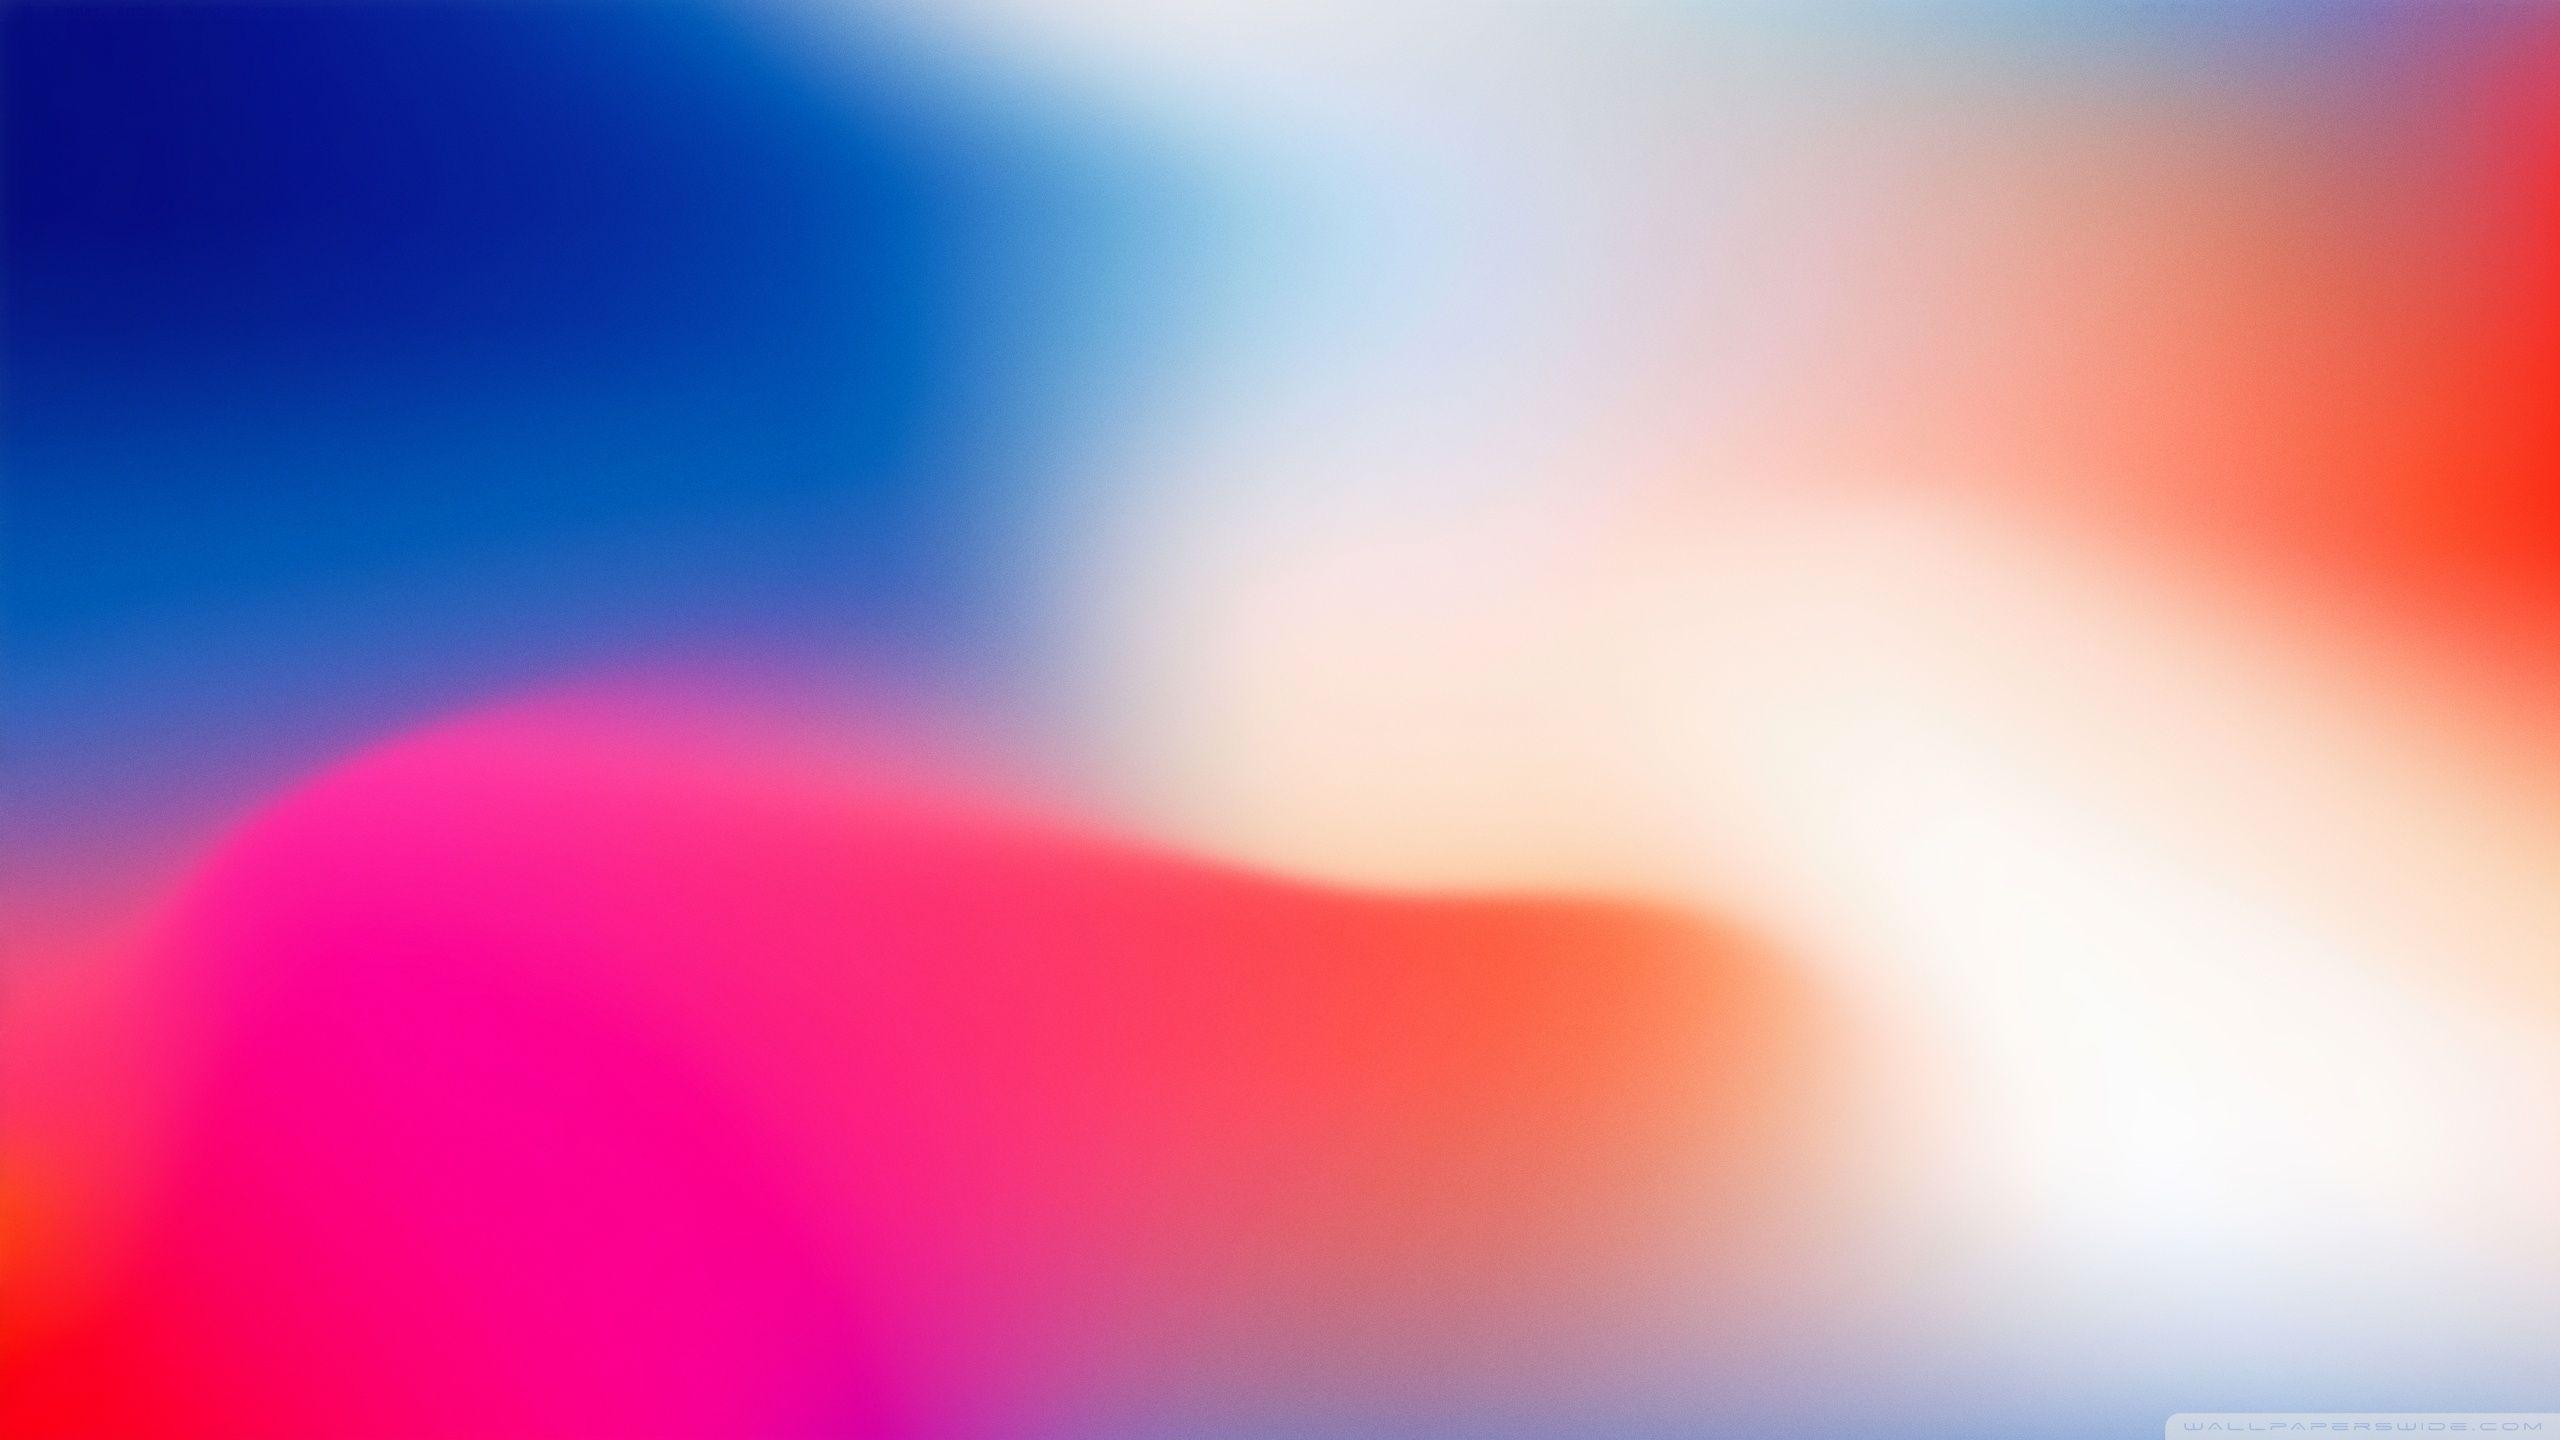 Apple iPhone X Wallpapers - Wallpaper Cave